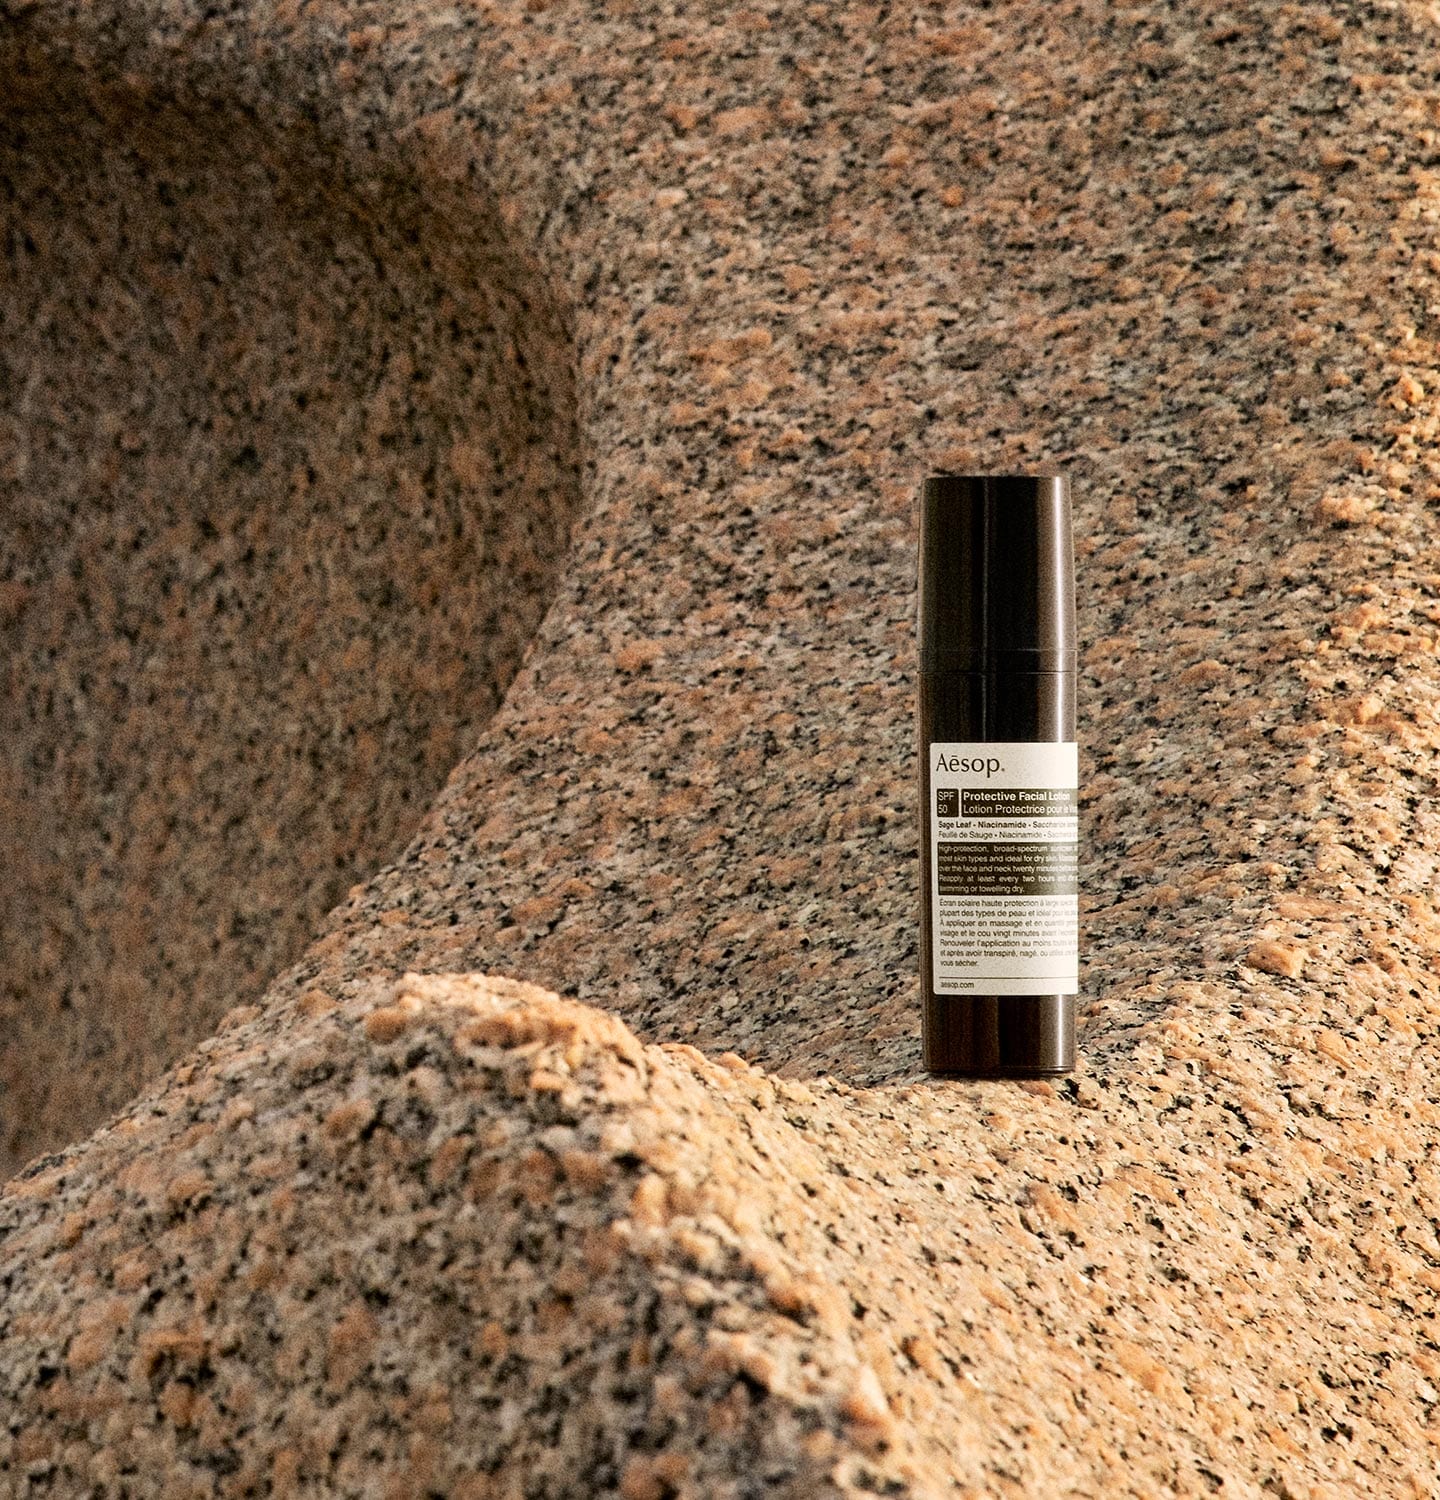 A bottle of Protective Facial Lotion SPF50 resting on a rocky shoreline.